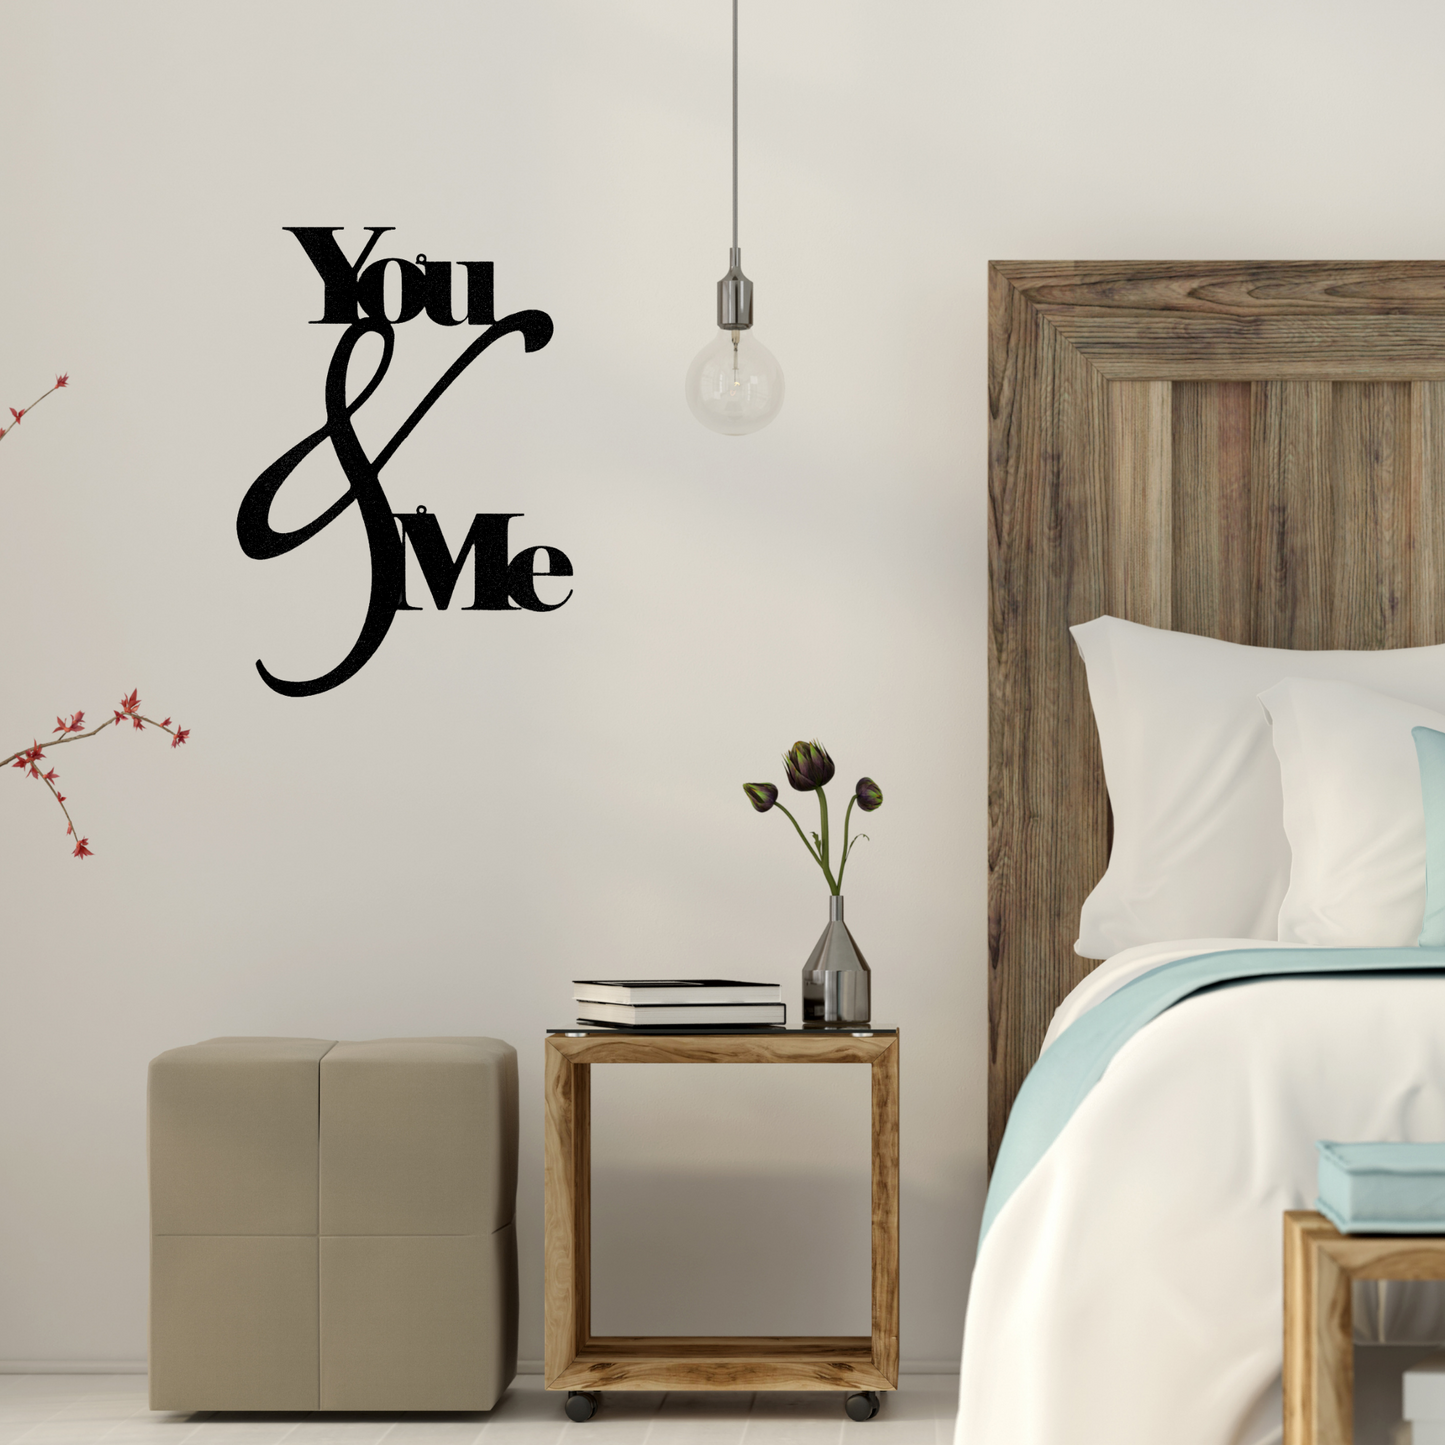 You and Me Quote - Steel Sign, House Decor, Wall Art, Outdoor Signs, Metal Signs, Metal Decorative Sign, Door Hanger, Monogram Wall Art